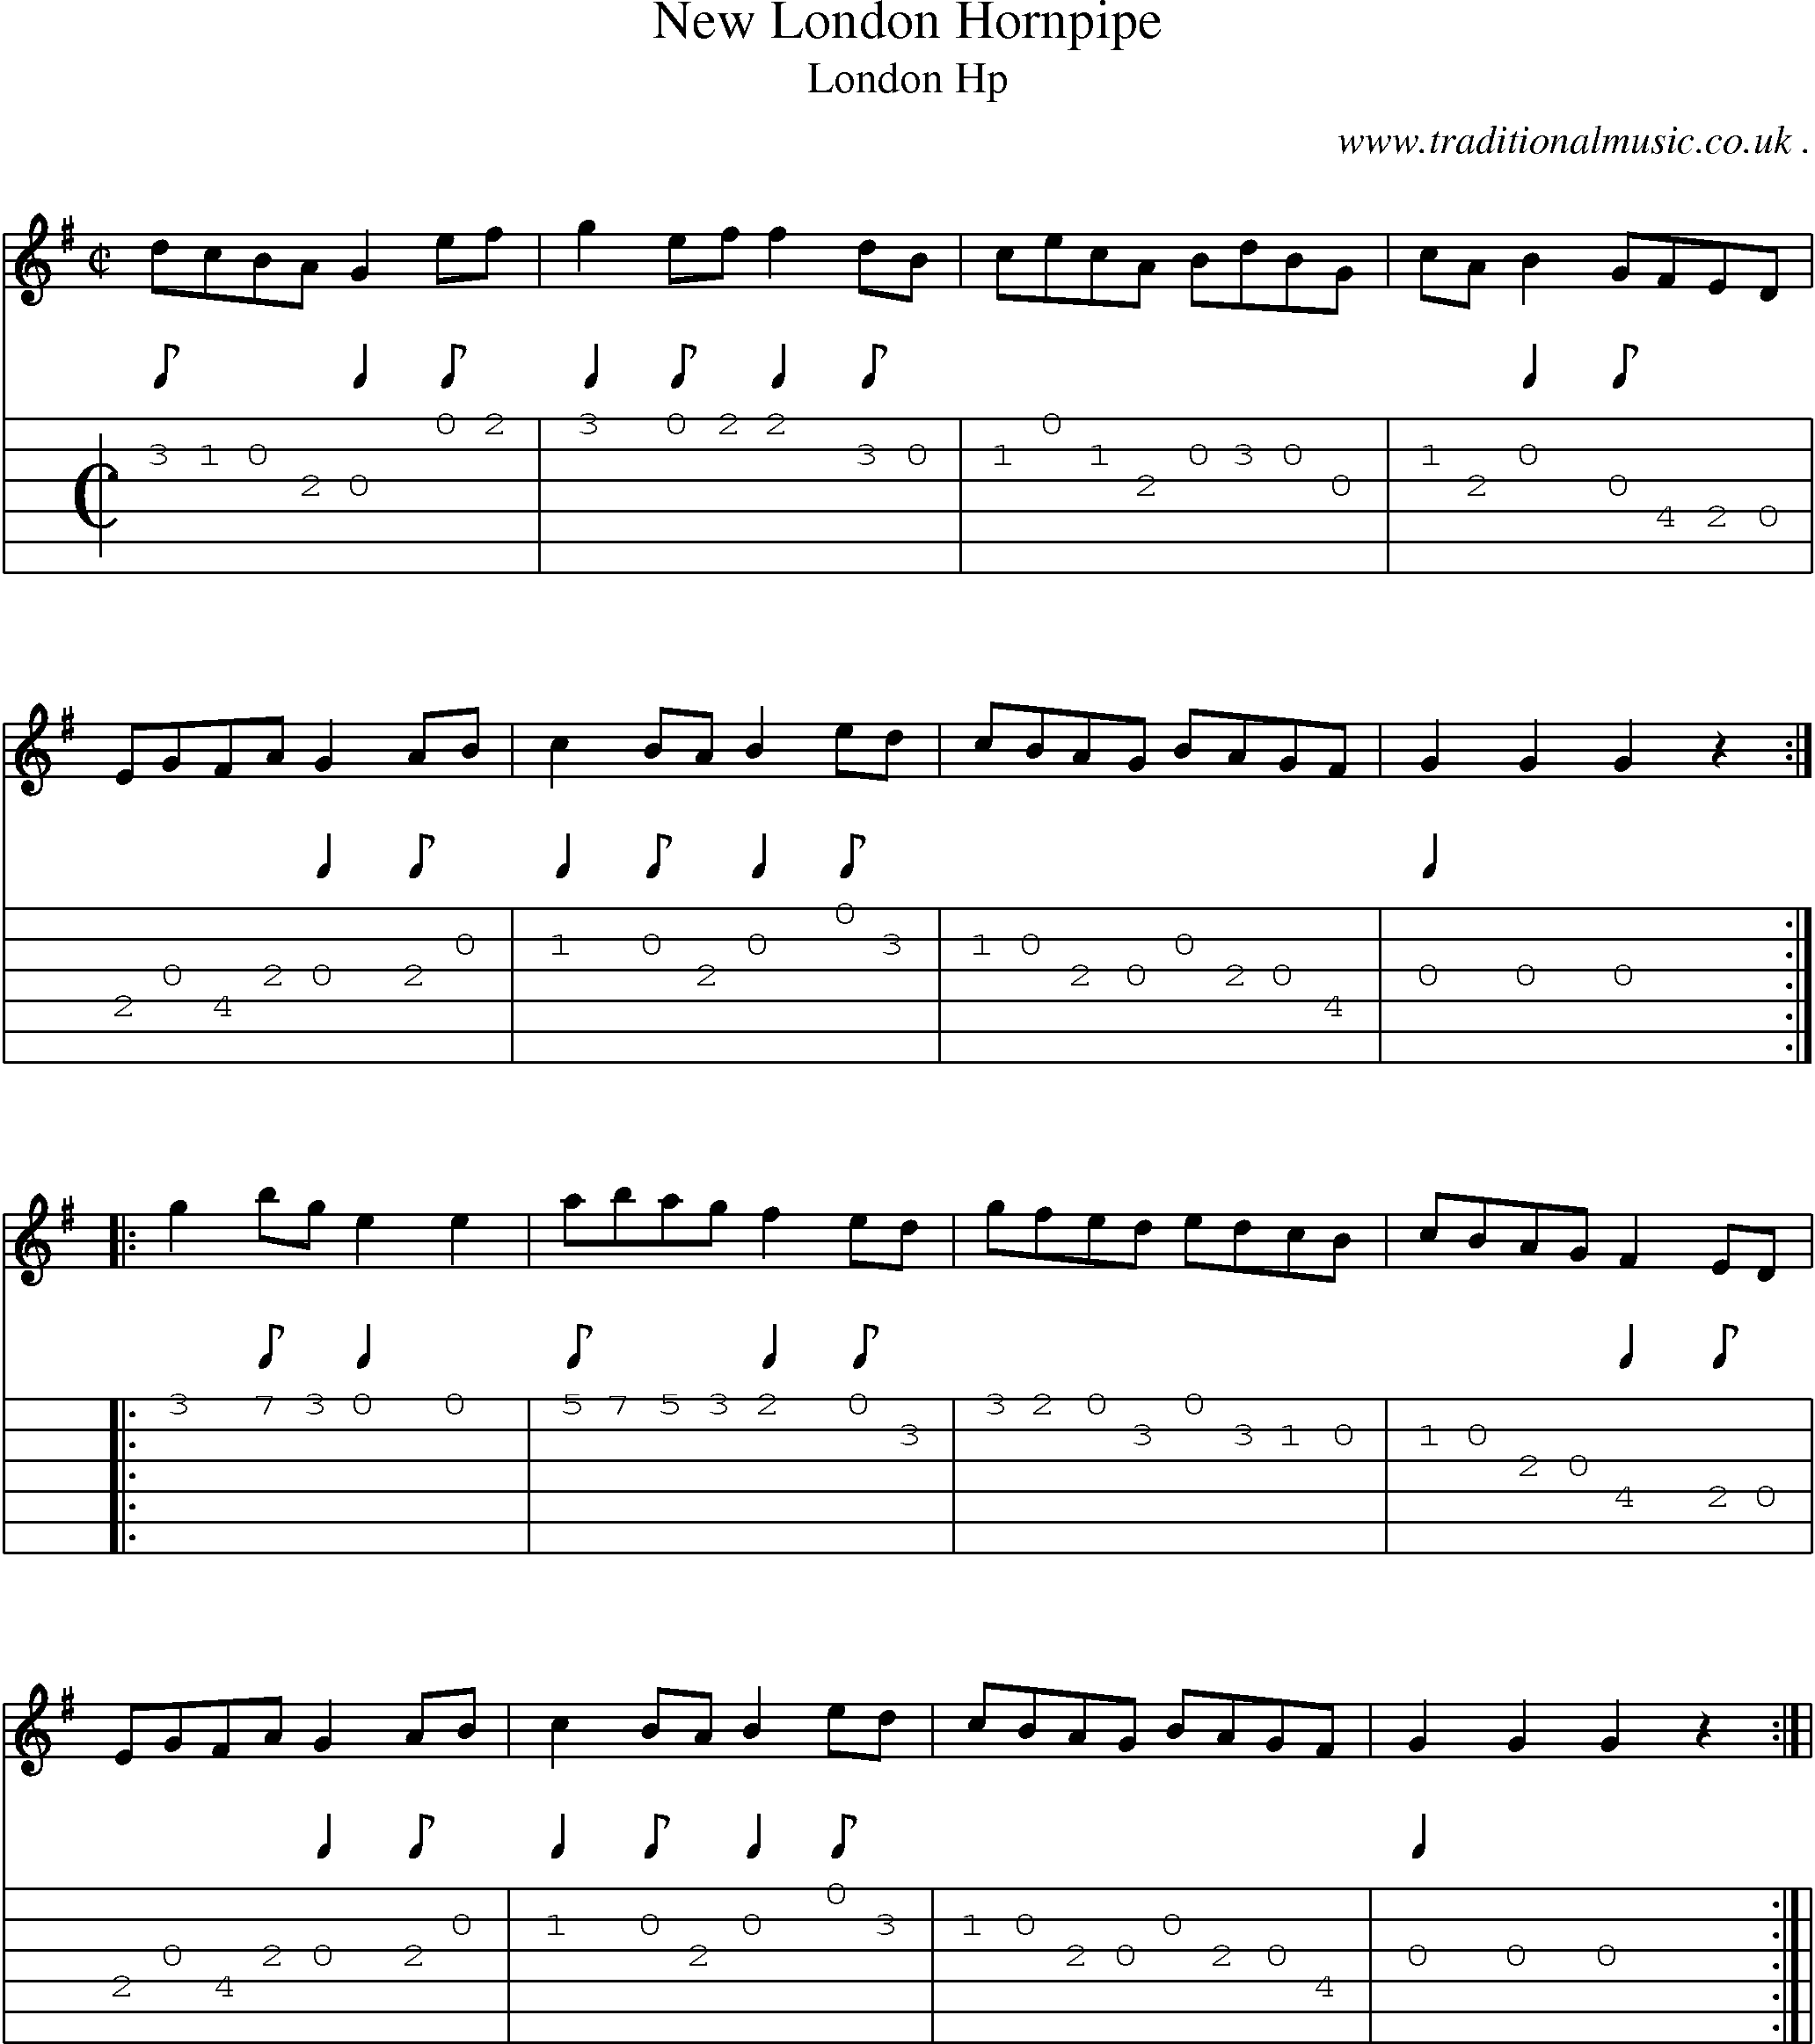 Sheet-Music and Guitar Tabs for New London Hornpipe